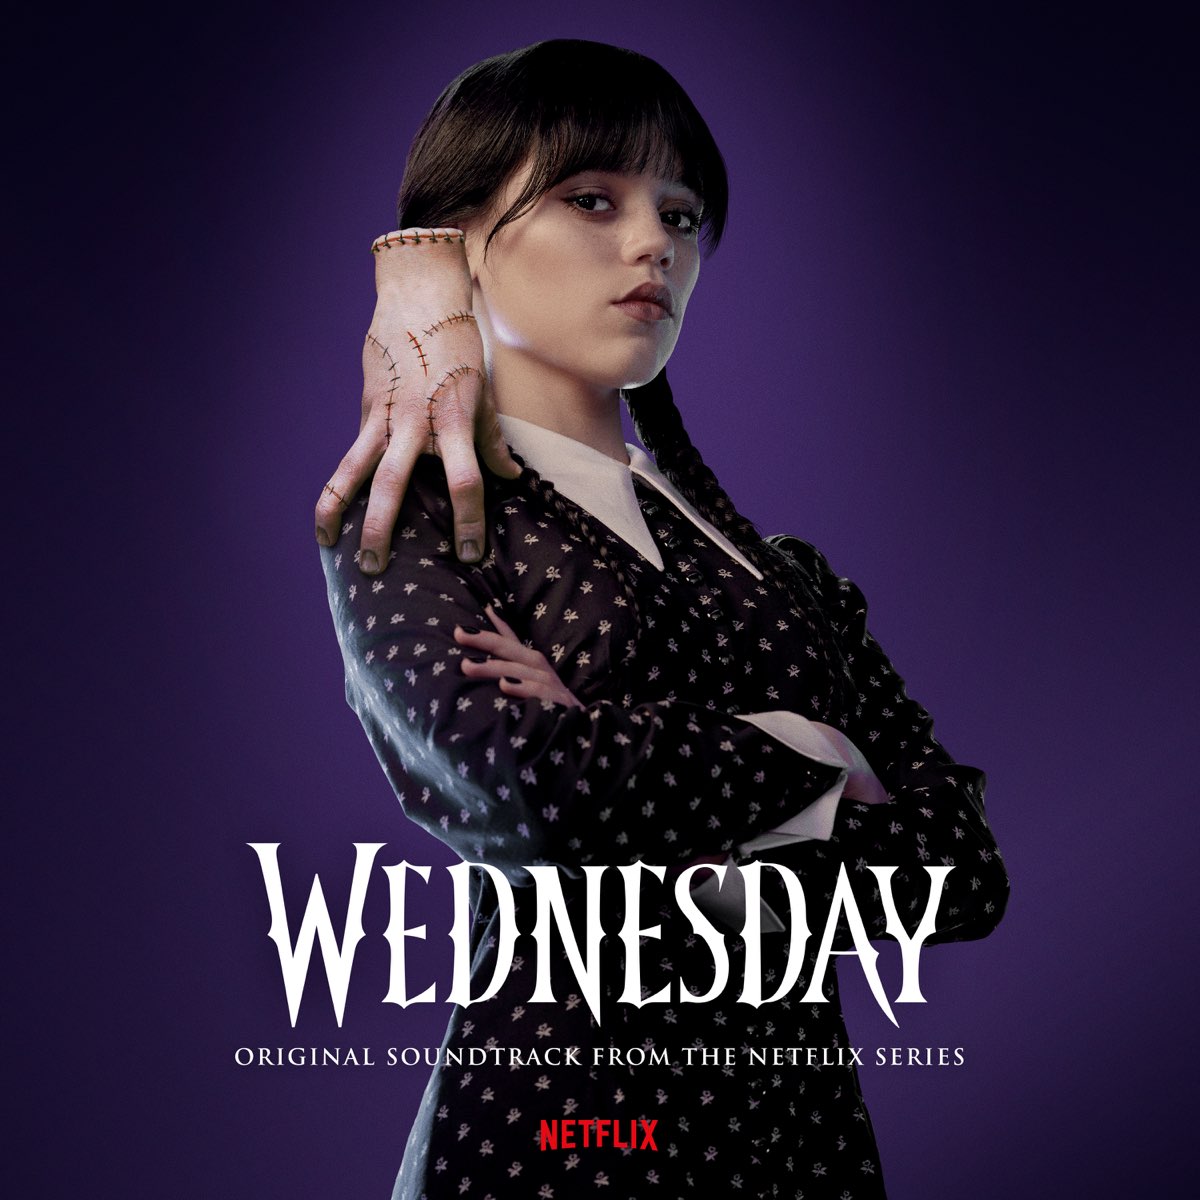 Wednesday' Soundtrack: Which Songs Are In The Netflix Show? 